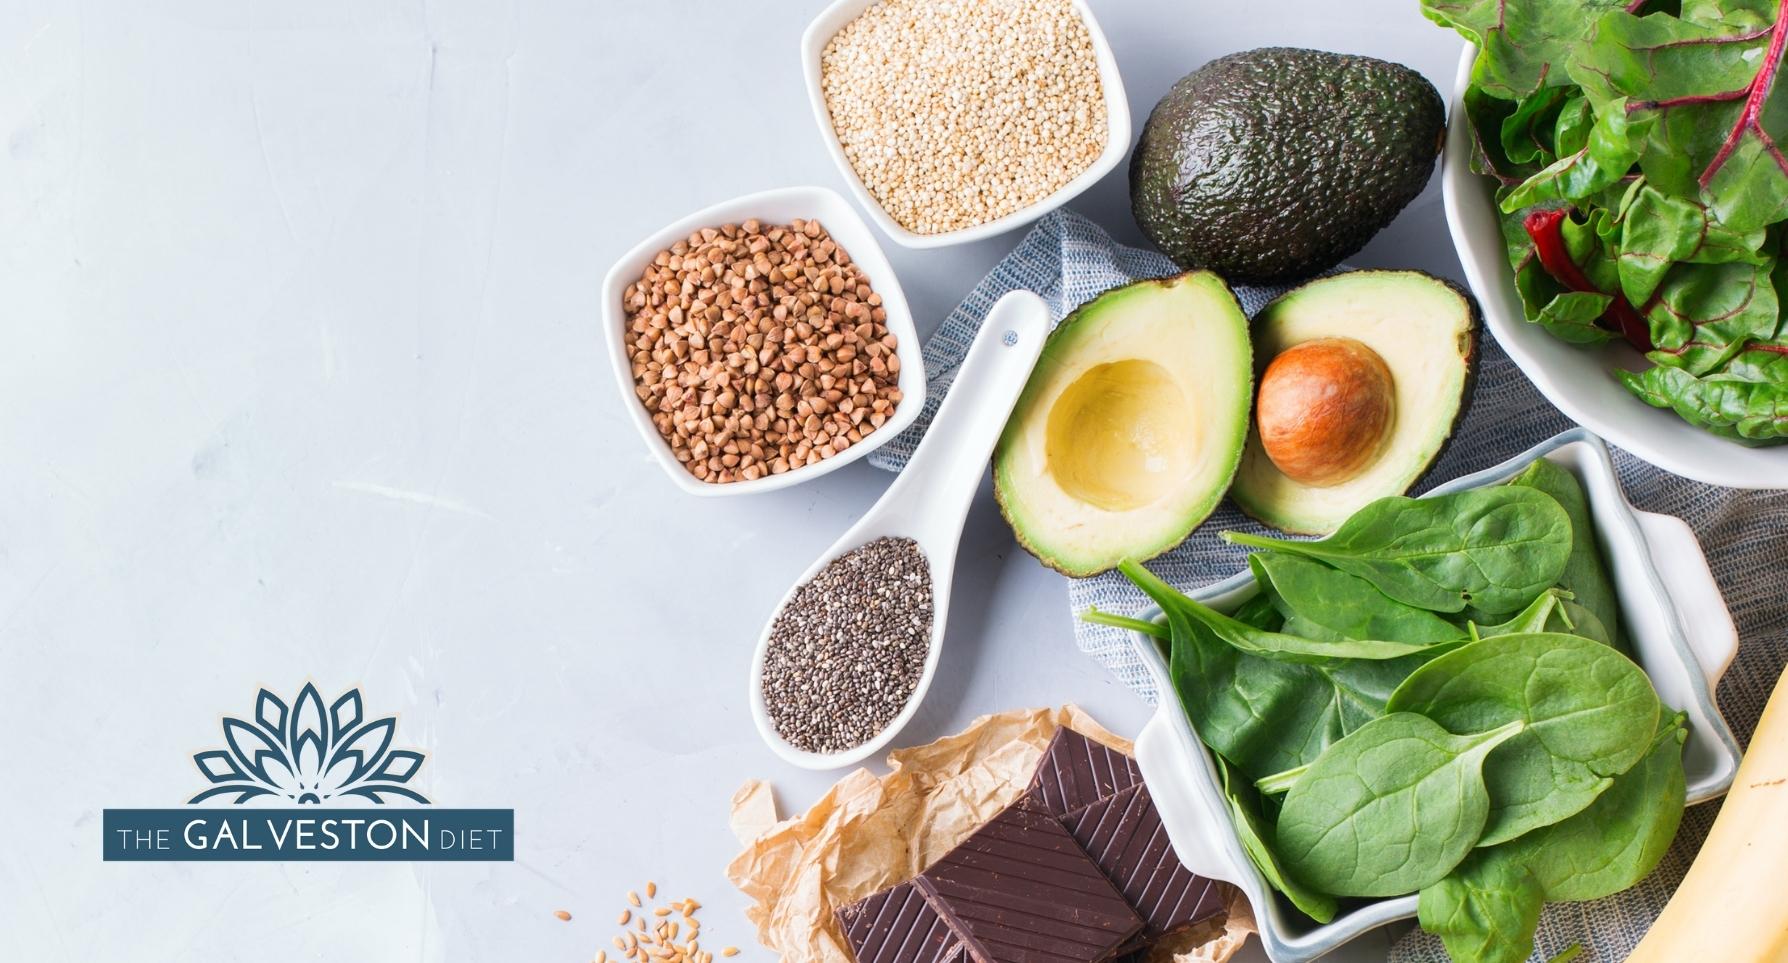 Blog post featured image with avocados, spinach, nuts and seeds. All foods rich in magnesium for menopause symptoms.